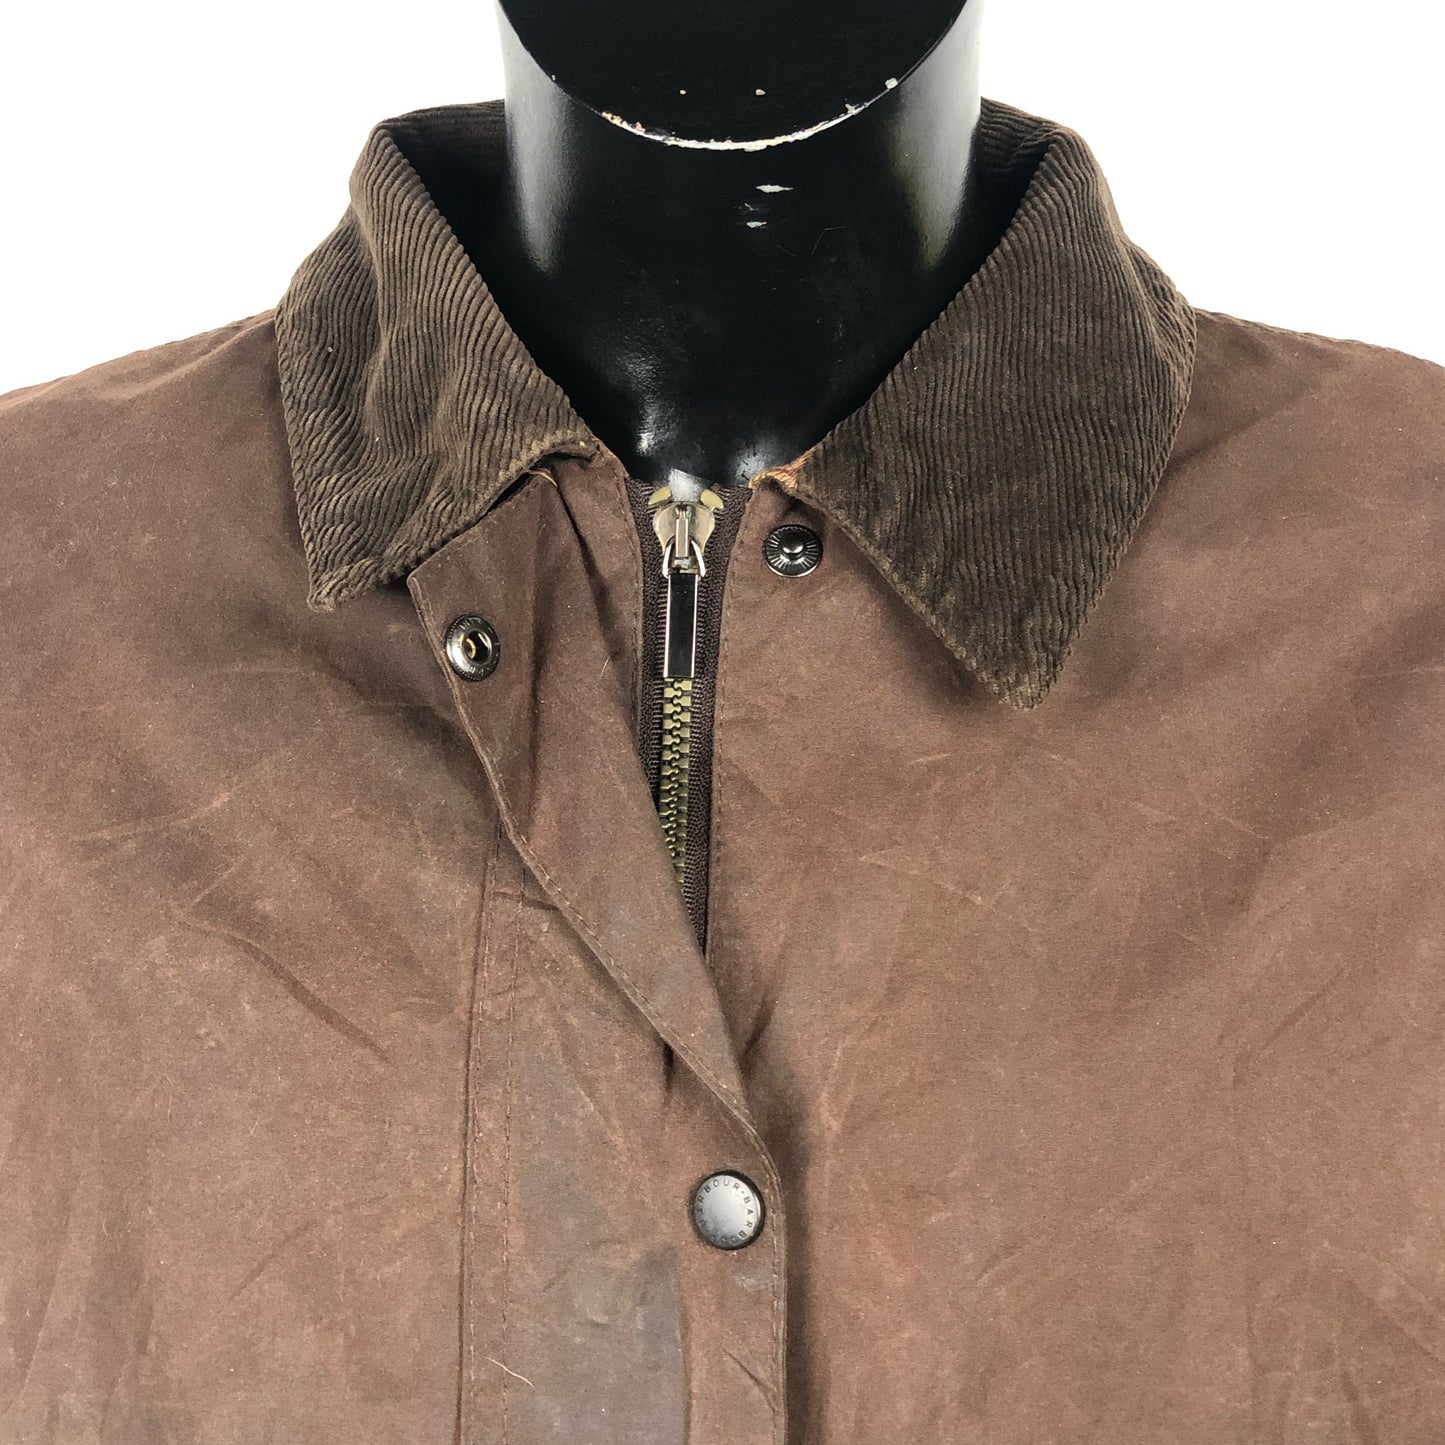 Giacca Barbour Marrone Newmarket UNISEX Tg.48 Brown Wax Jacket UK18